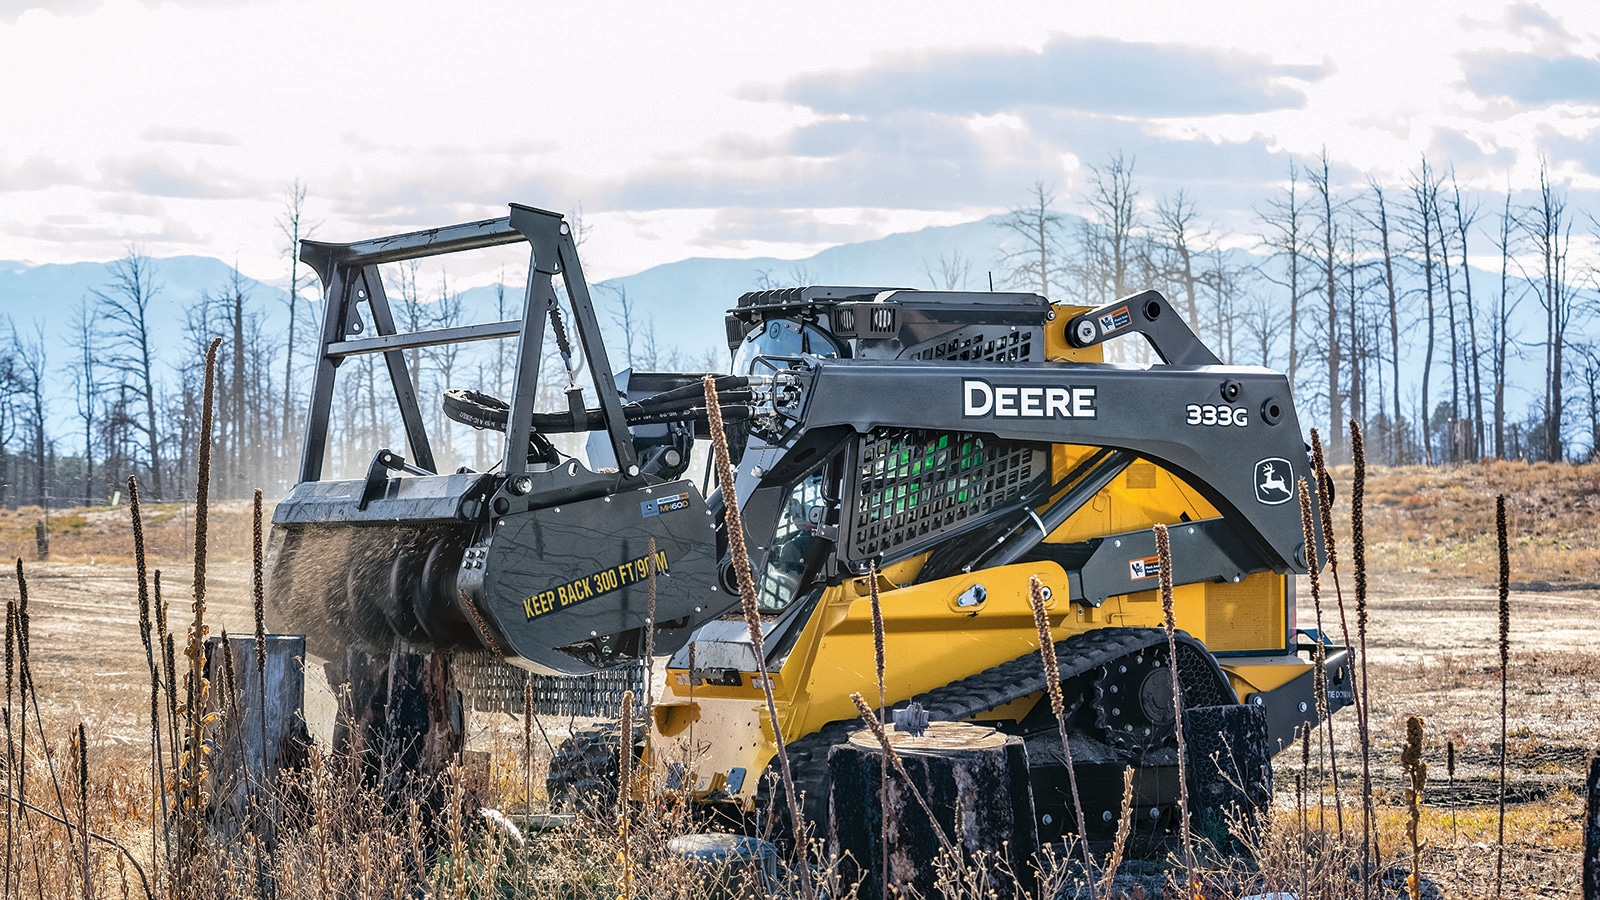 333G Compact Track Loader with MH60D Mulching Head attachment grinds down a stump in a cleared area affected by wildfires